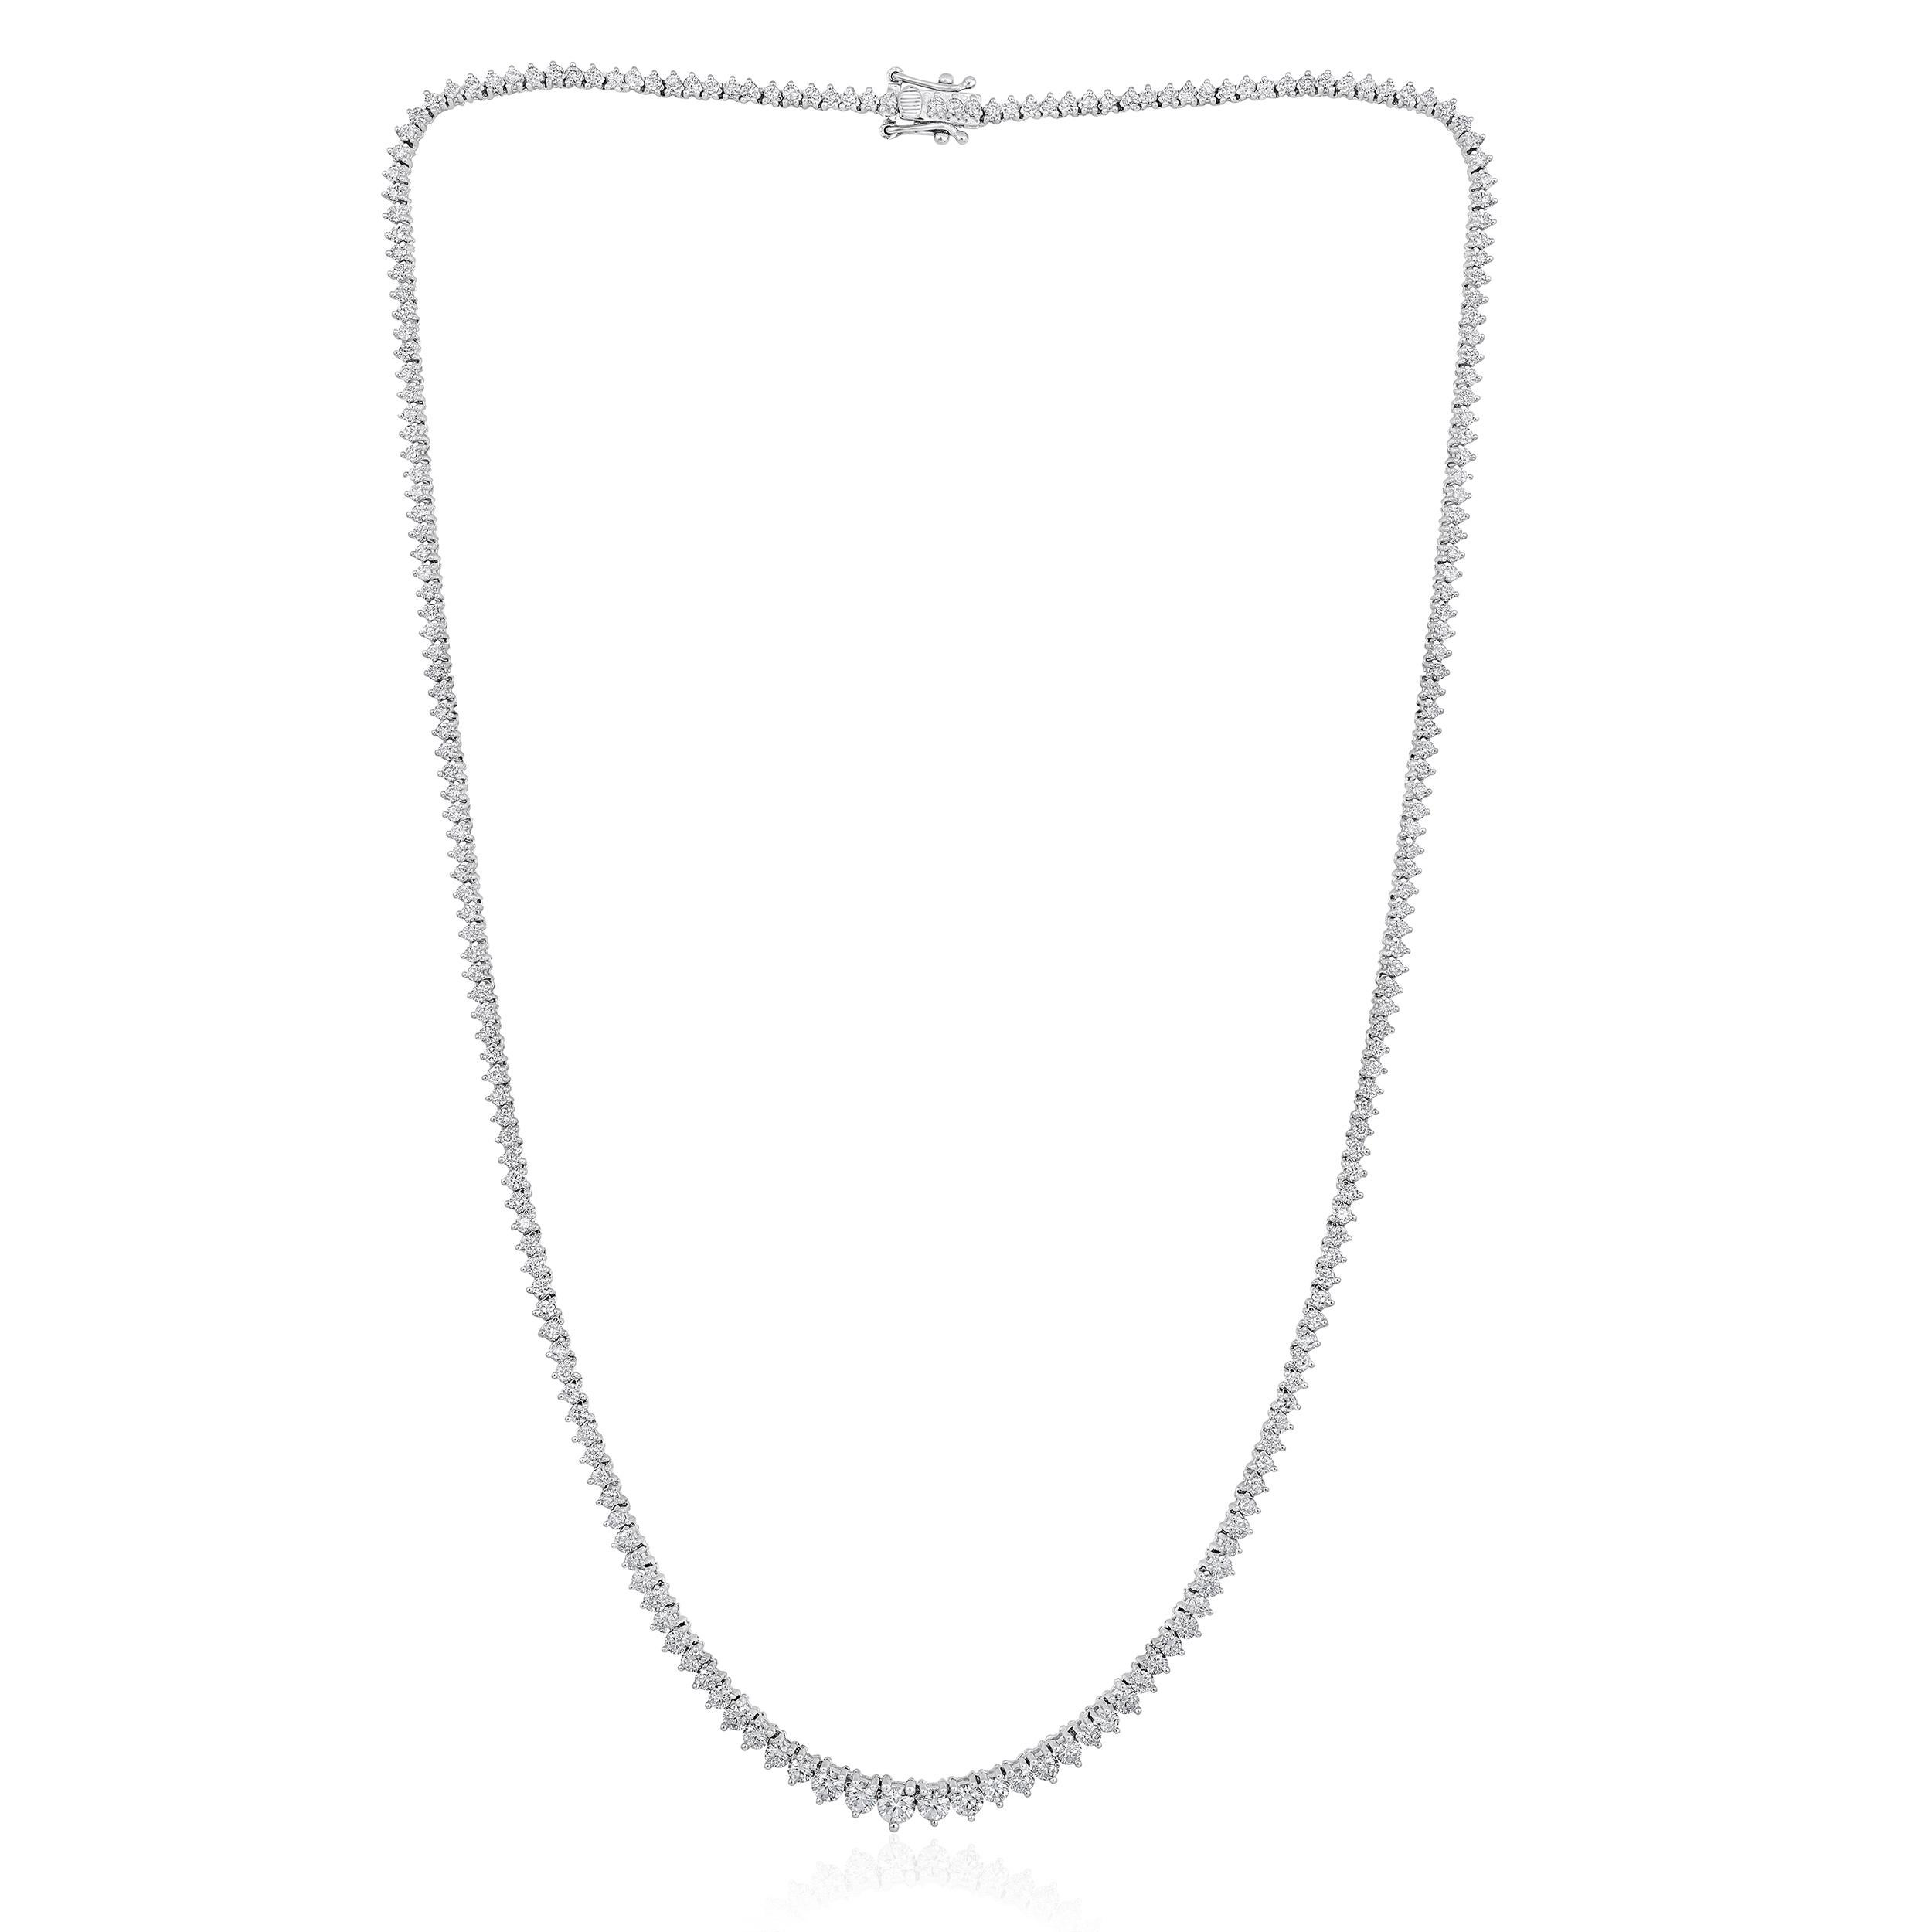 Crafted in 14.75 grams of 14K White Gold, the necklace contains 217 stones of Round Diamonds with a total of 4.16 carat in F-G color and VS-SI carat. The necklace length is 16 inches.

CONTEMPORARY AND TIMELESS ESSENCE: Crafted in 14-karat/18-karat